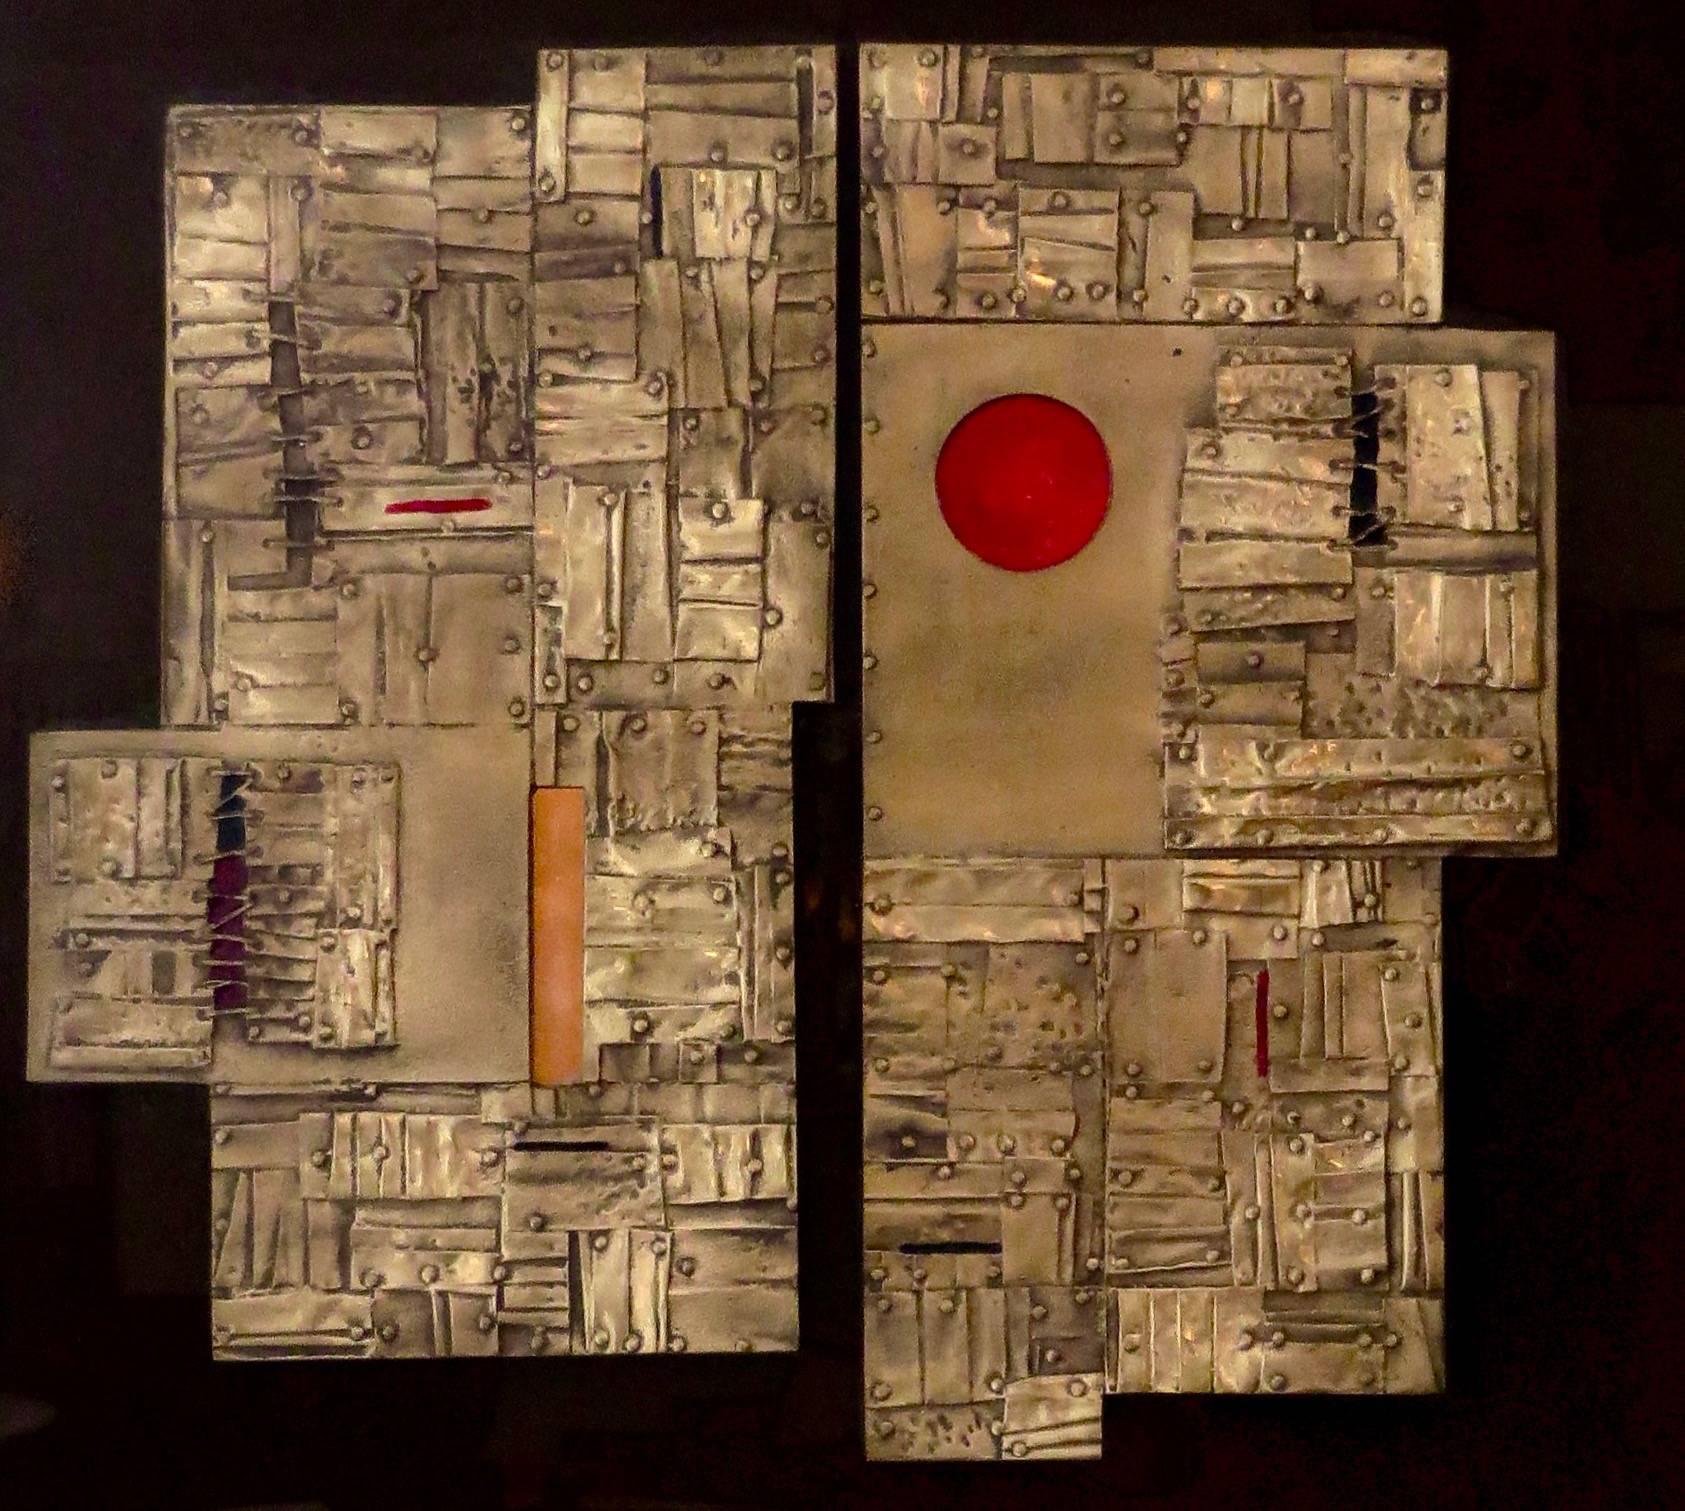 Italian artist Esa Fedrigolli signed, dated and numbered bronze, copper and enamel wall sculpture/paintings. Each sculpture/painting is composed of a veritable bronze composition of small squares, rectangles and other forms with a visual stitched